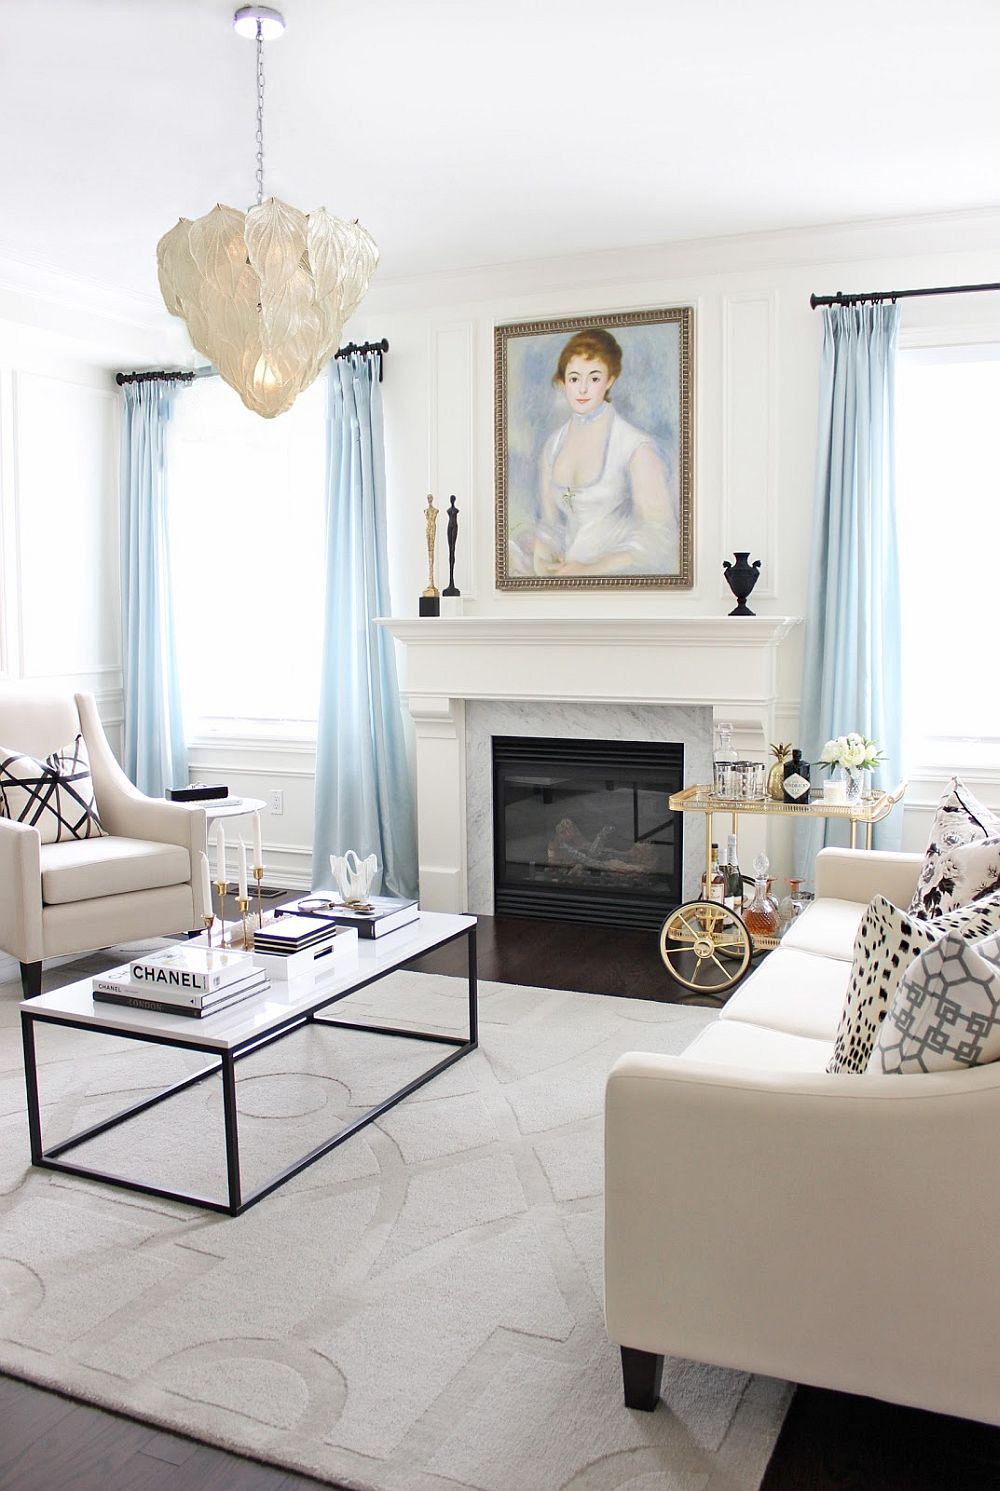 Exquisite living room in white with light blue drapes and French finesse